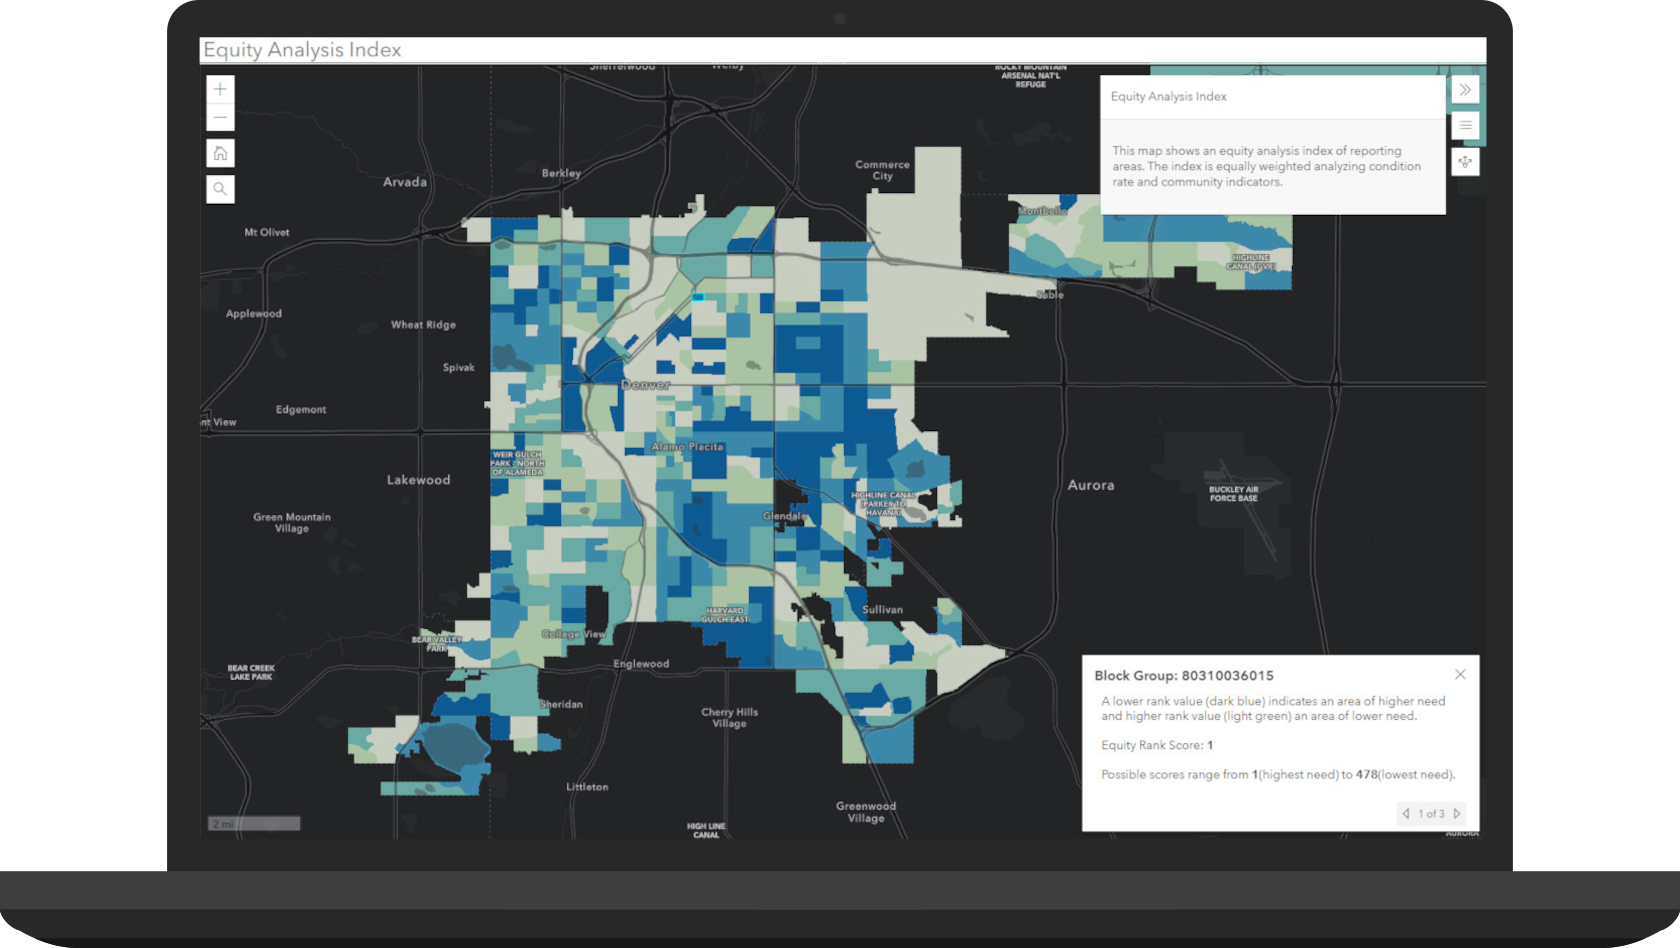 Equity Analysis Index application in ArcGIS Online